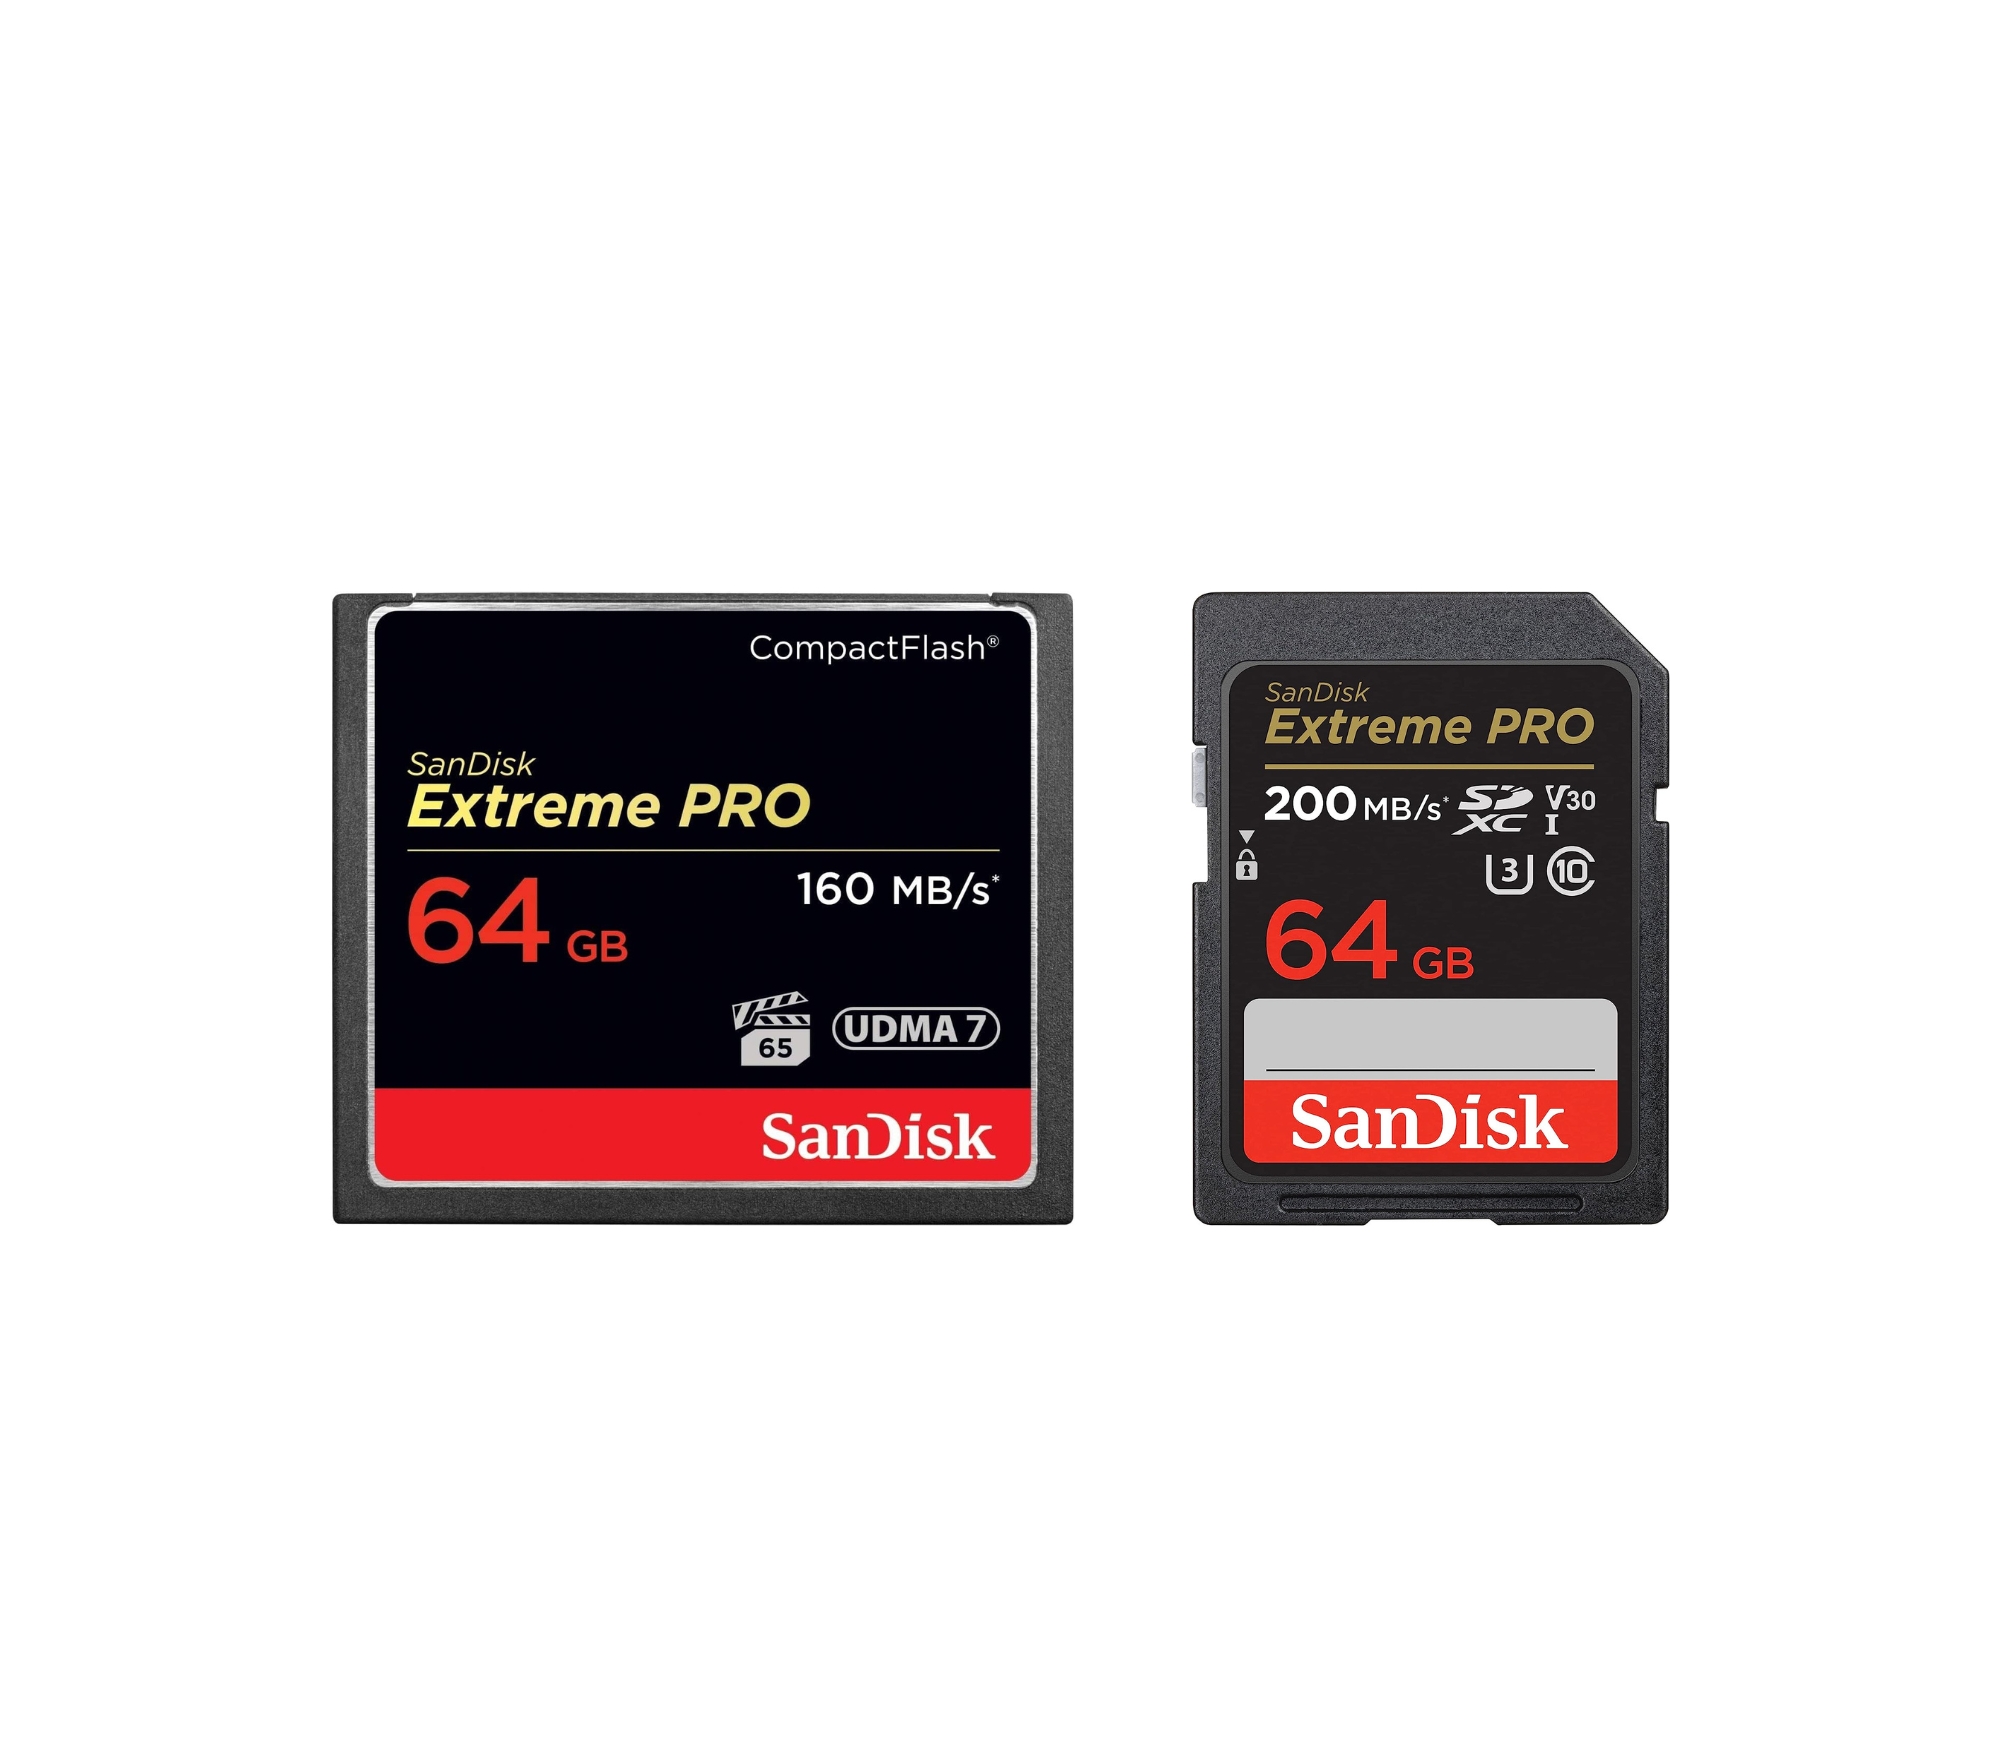 SanDisk memory cards for professional photographers